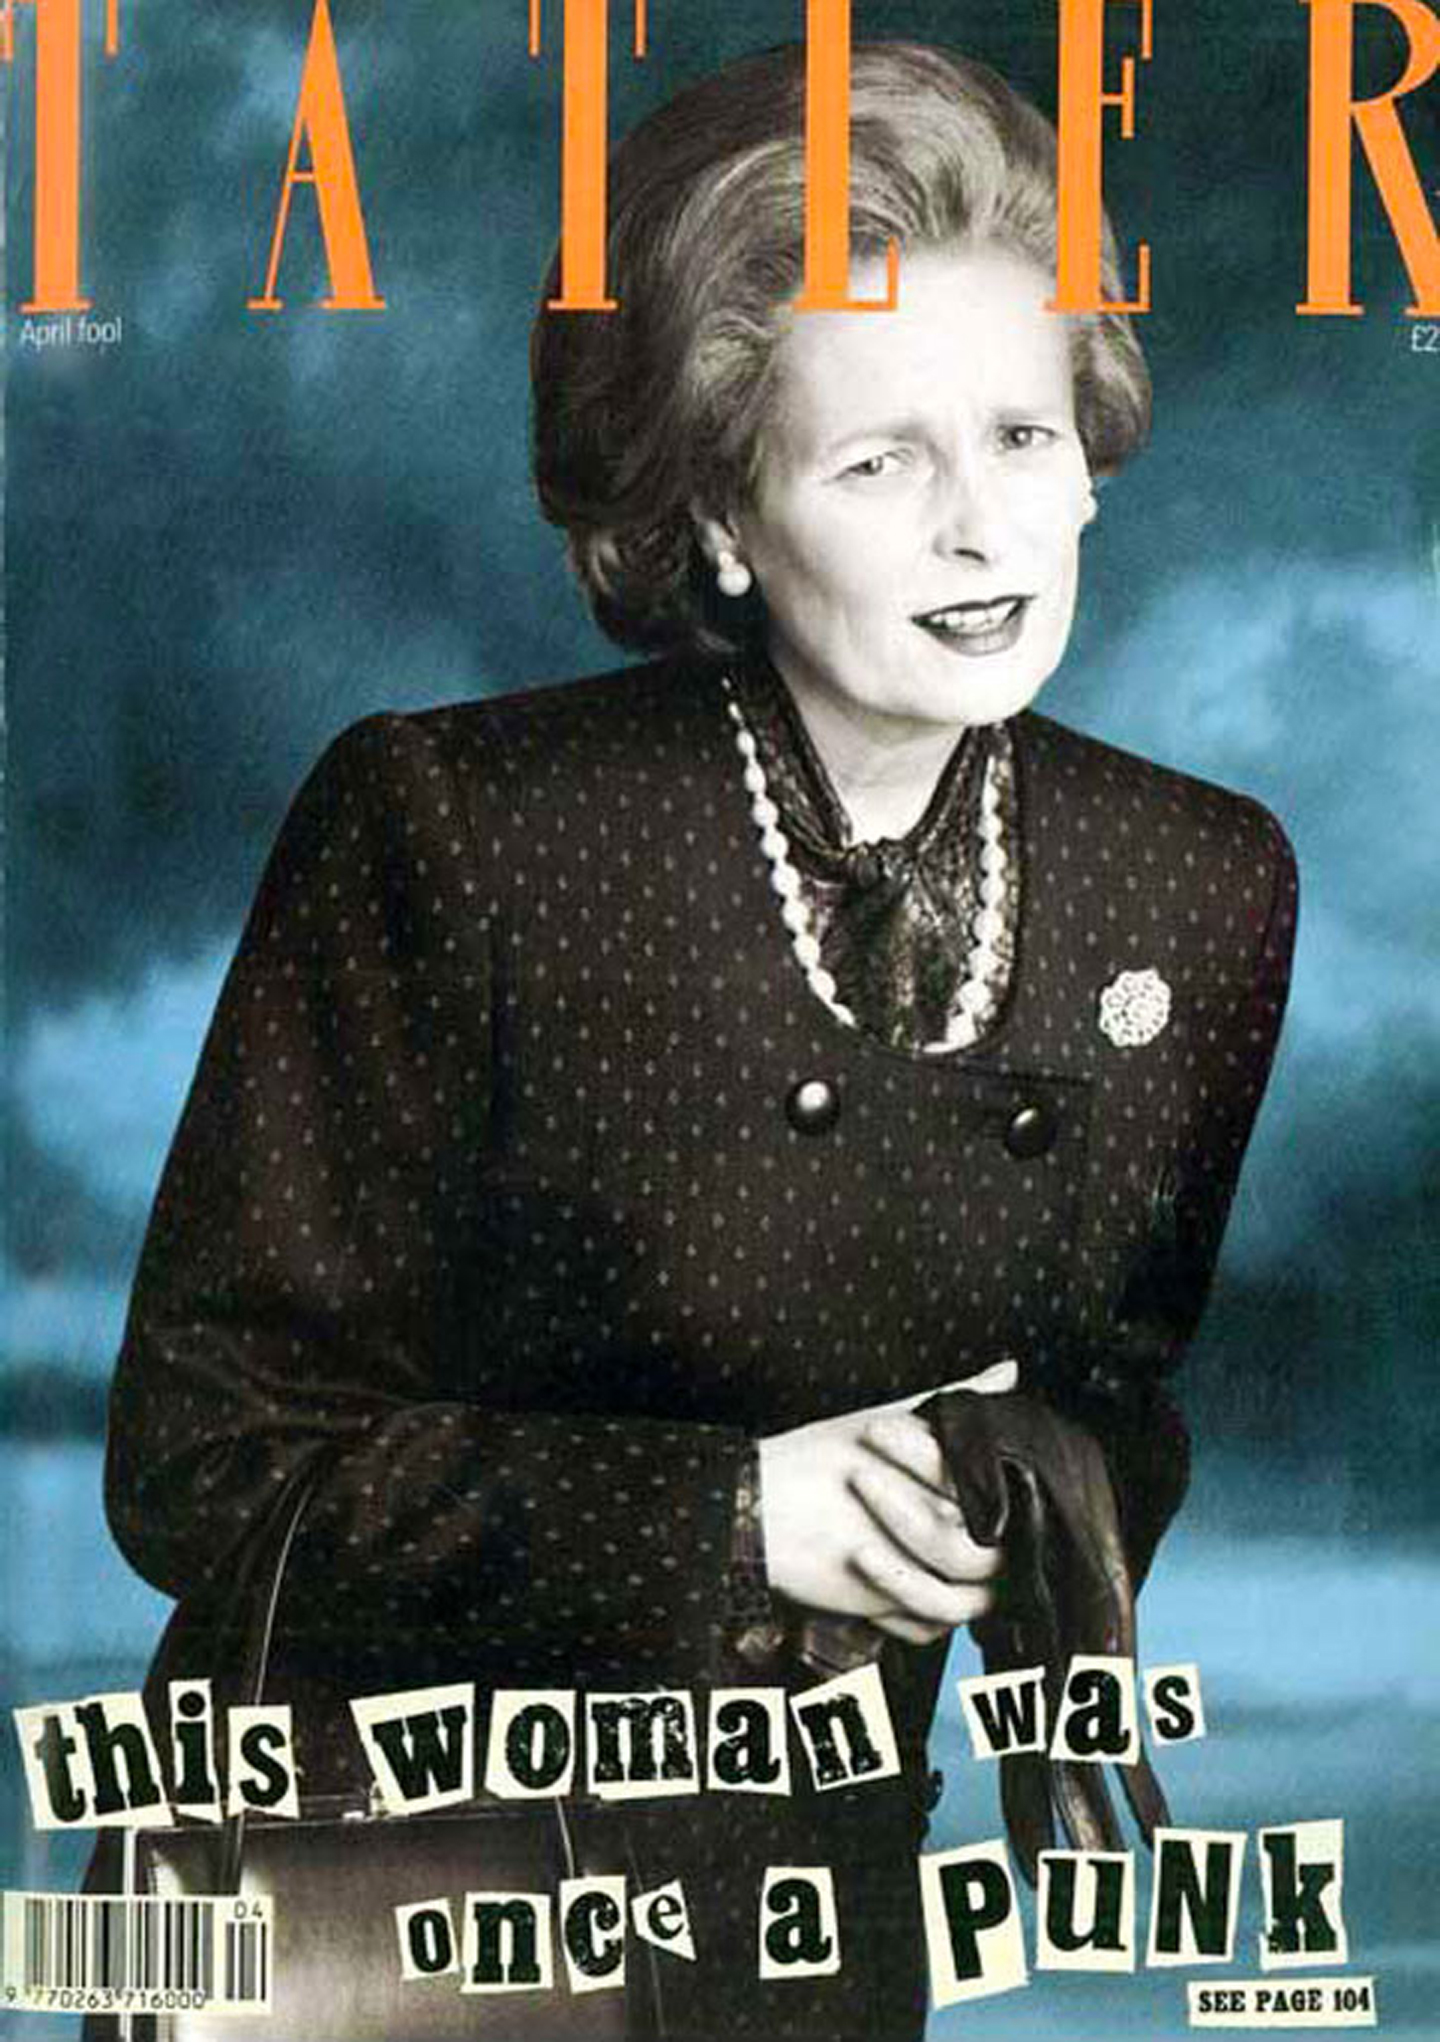 In 1989, Westwood dressed as the serving British Prime Minister, Margaret Thatcher, for the cover of Tatler